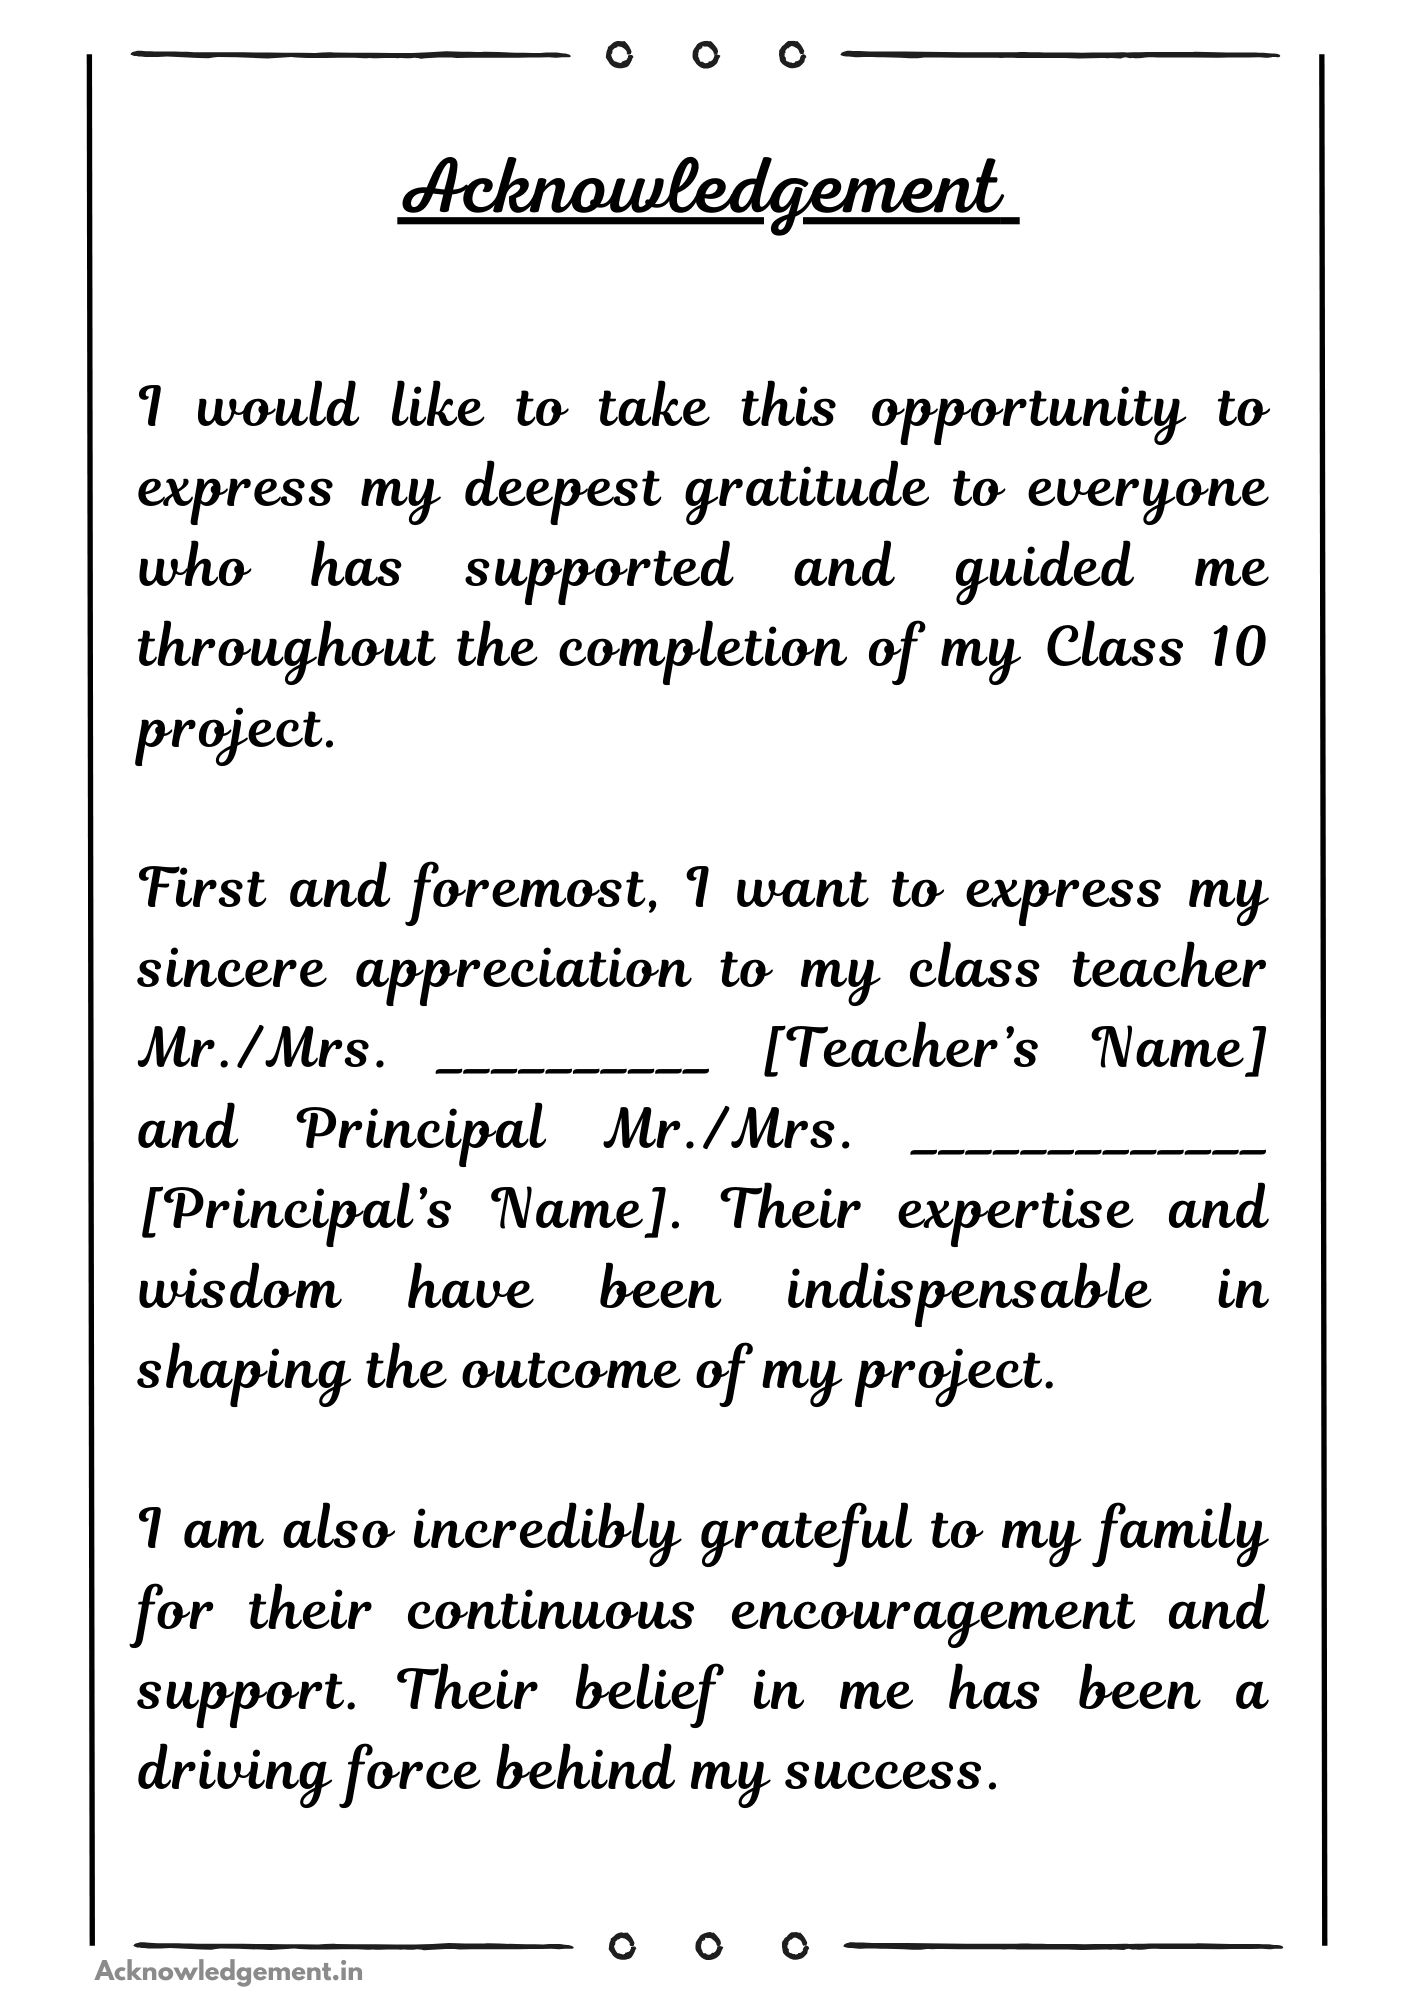 Acknowledgement for Class 10 Project